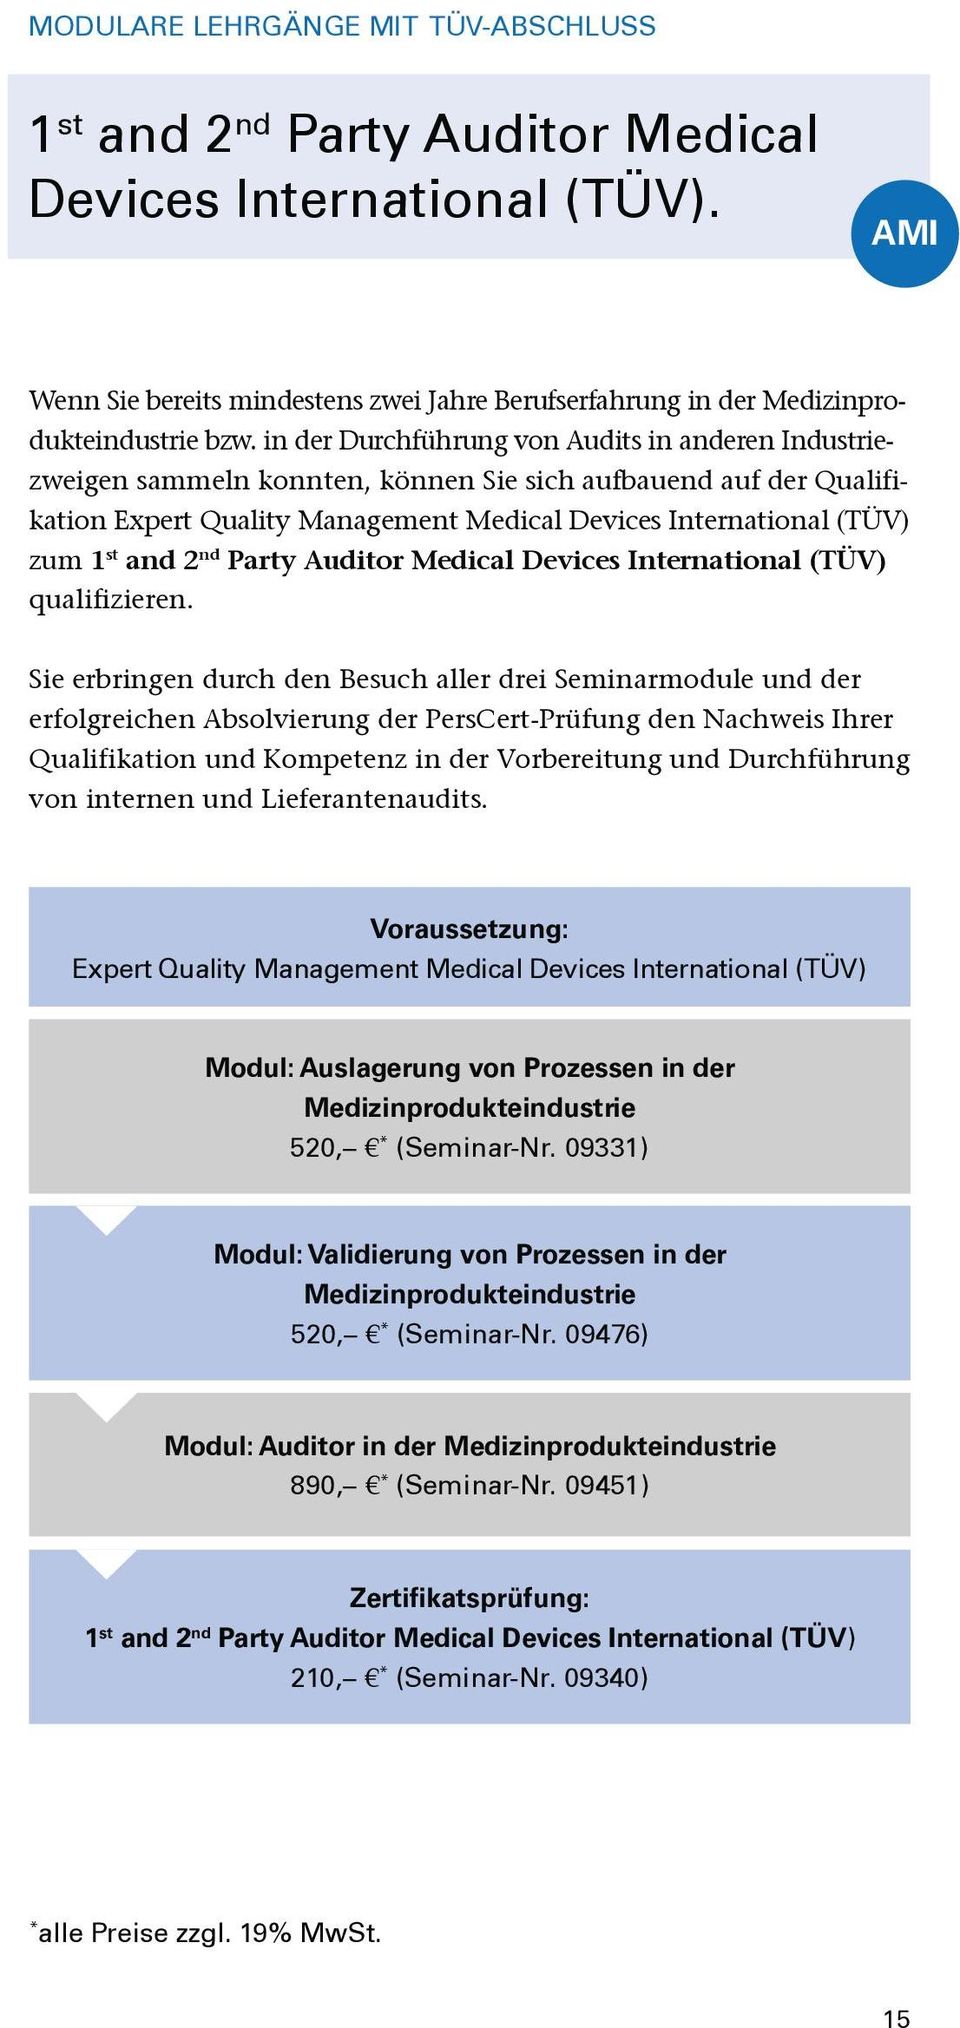 2 nd Party Auditor Medical Devices International (TÜV) qualifizieren.